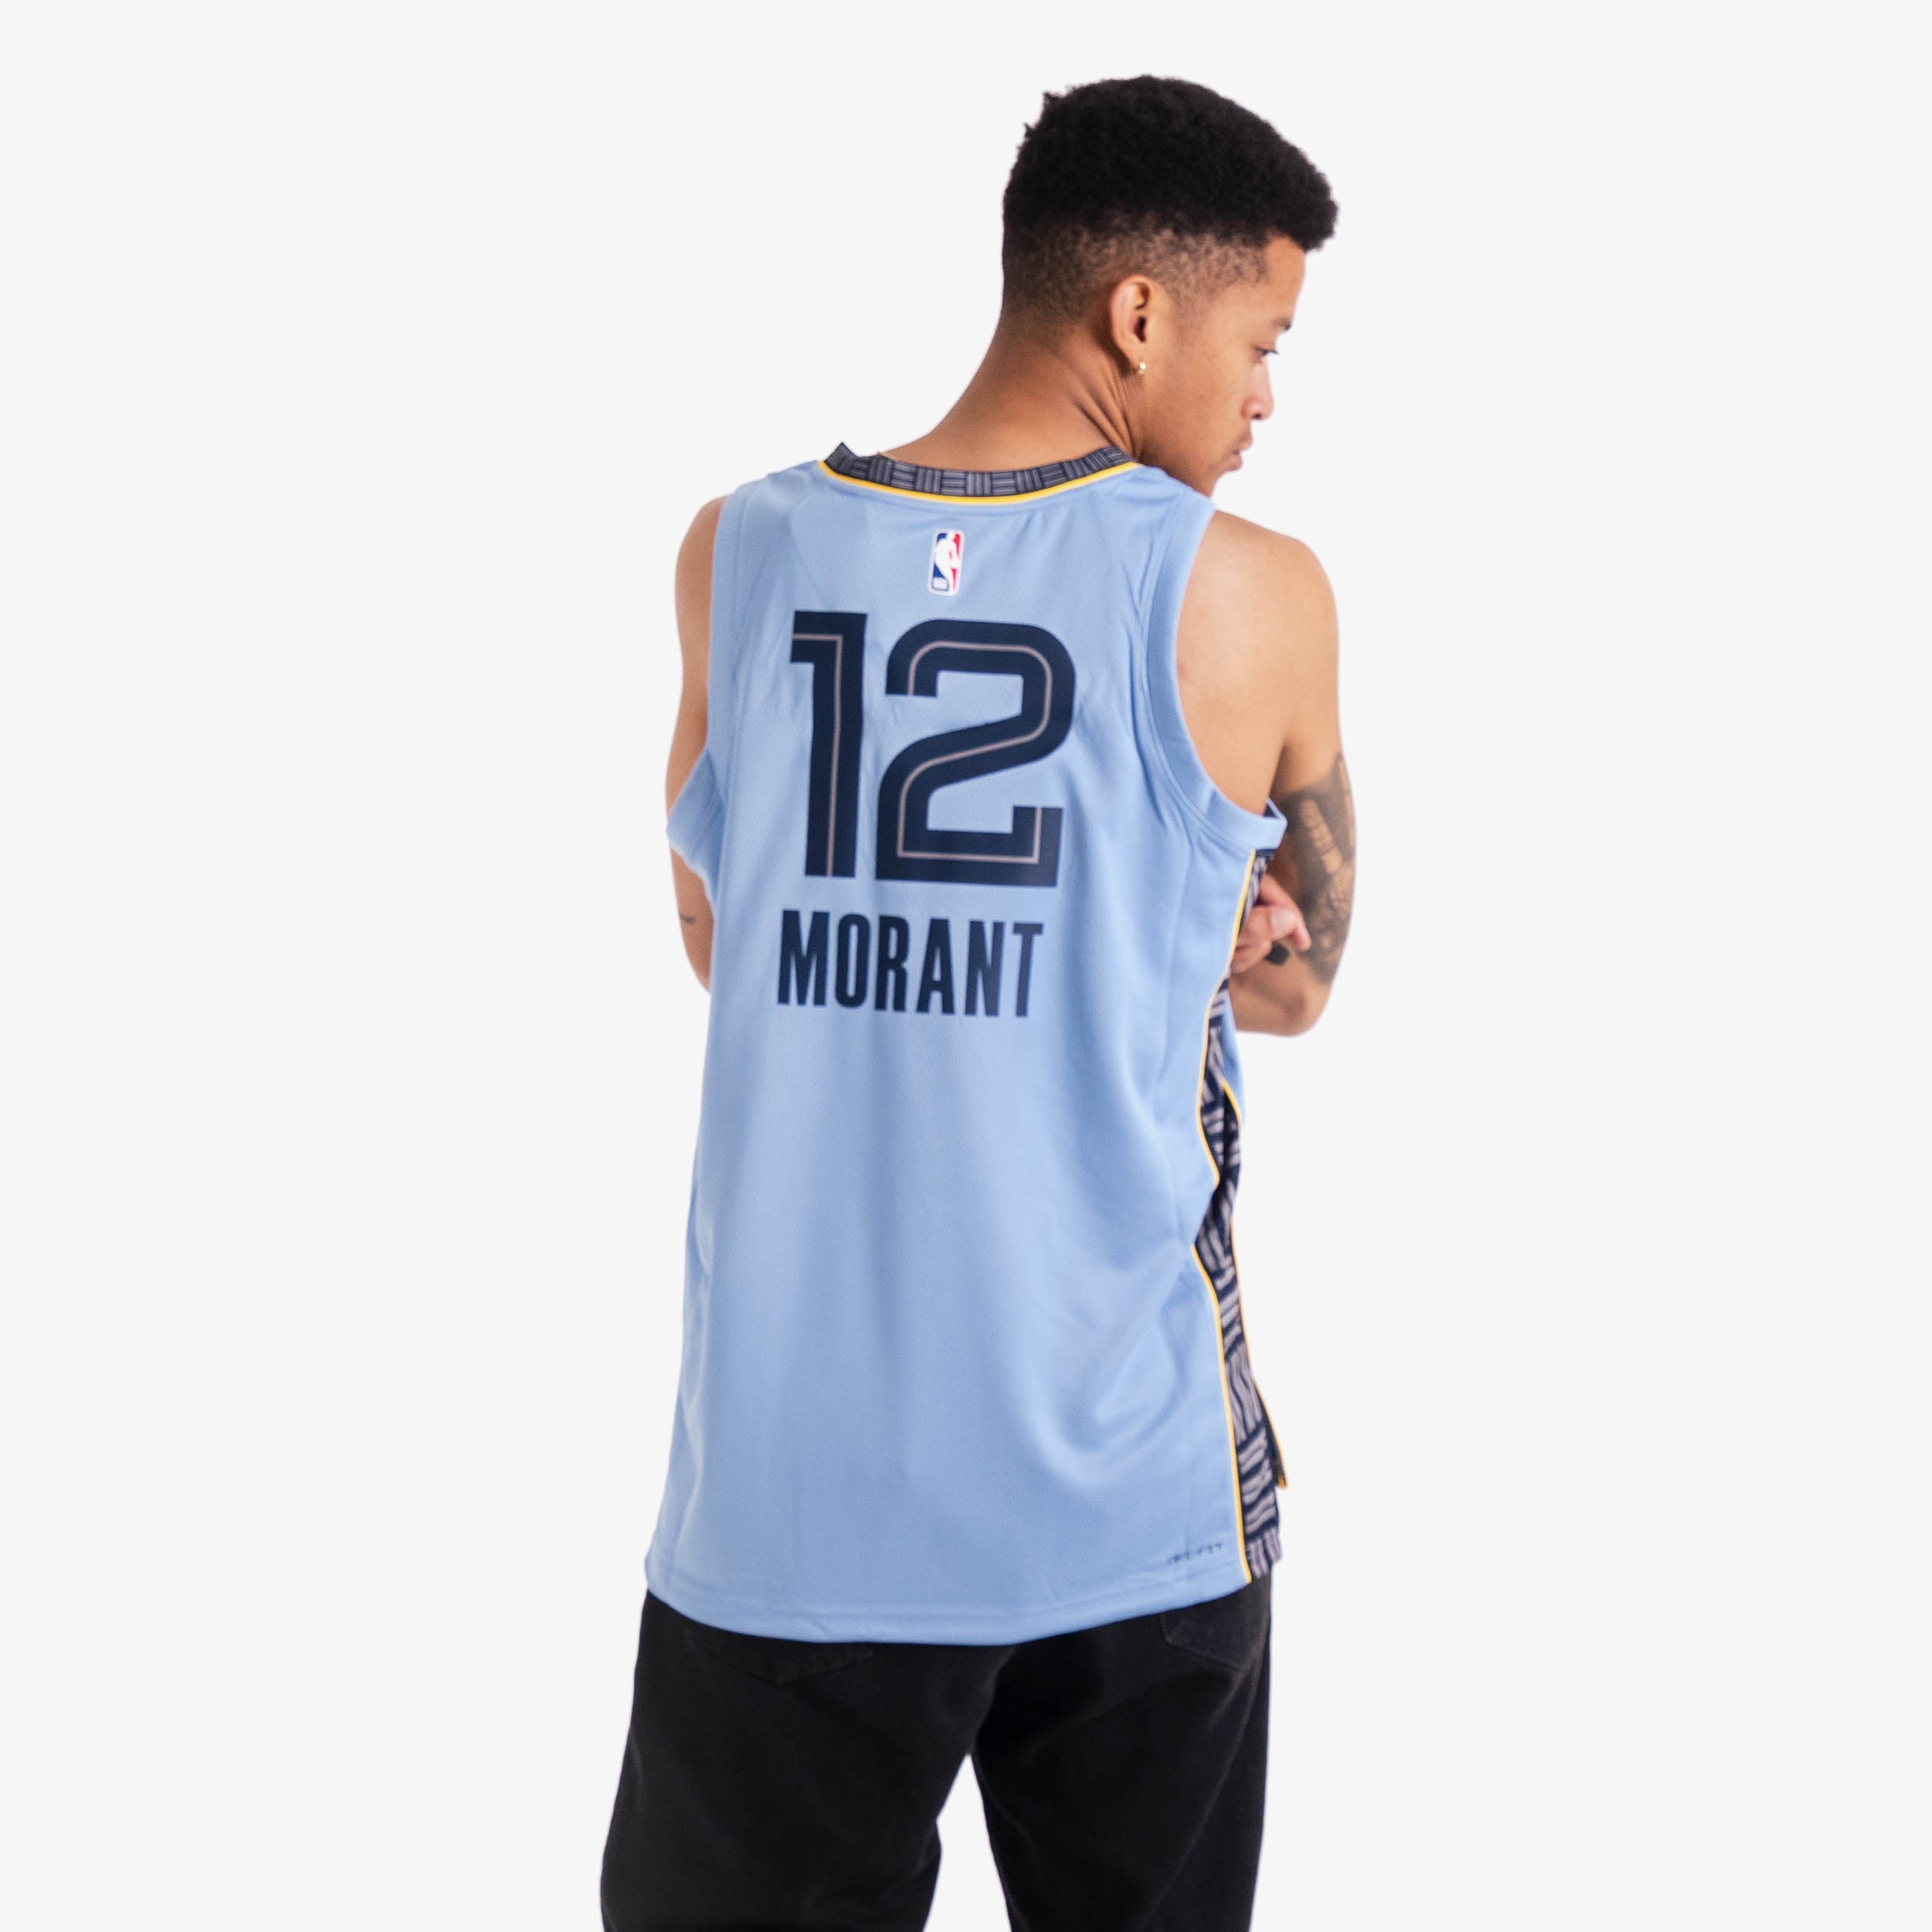 NWT Memphis Grizzlies Ja Morant Jersey Statement Edition All sizes